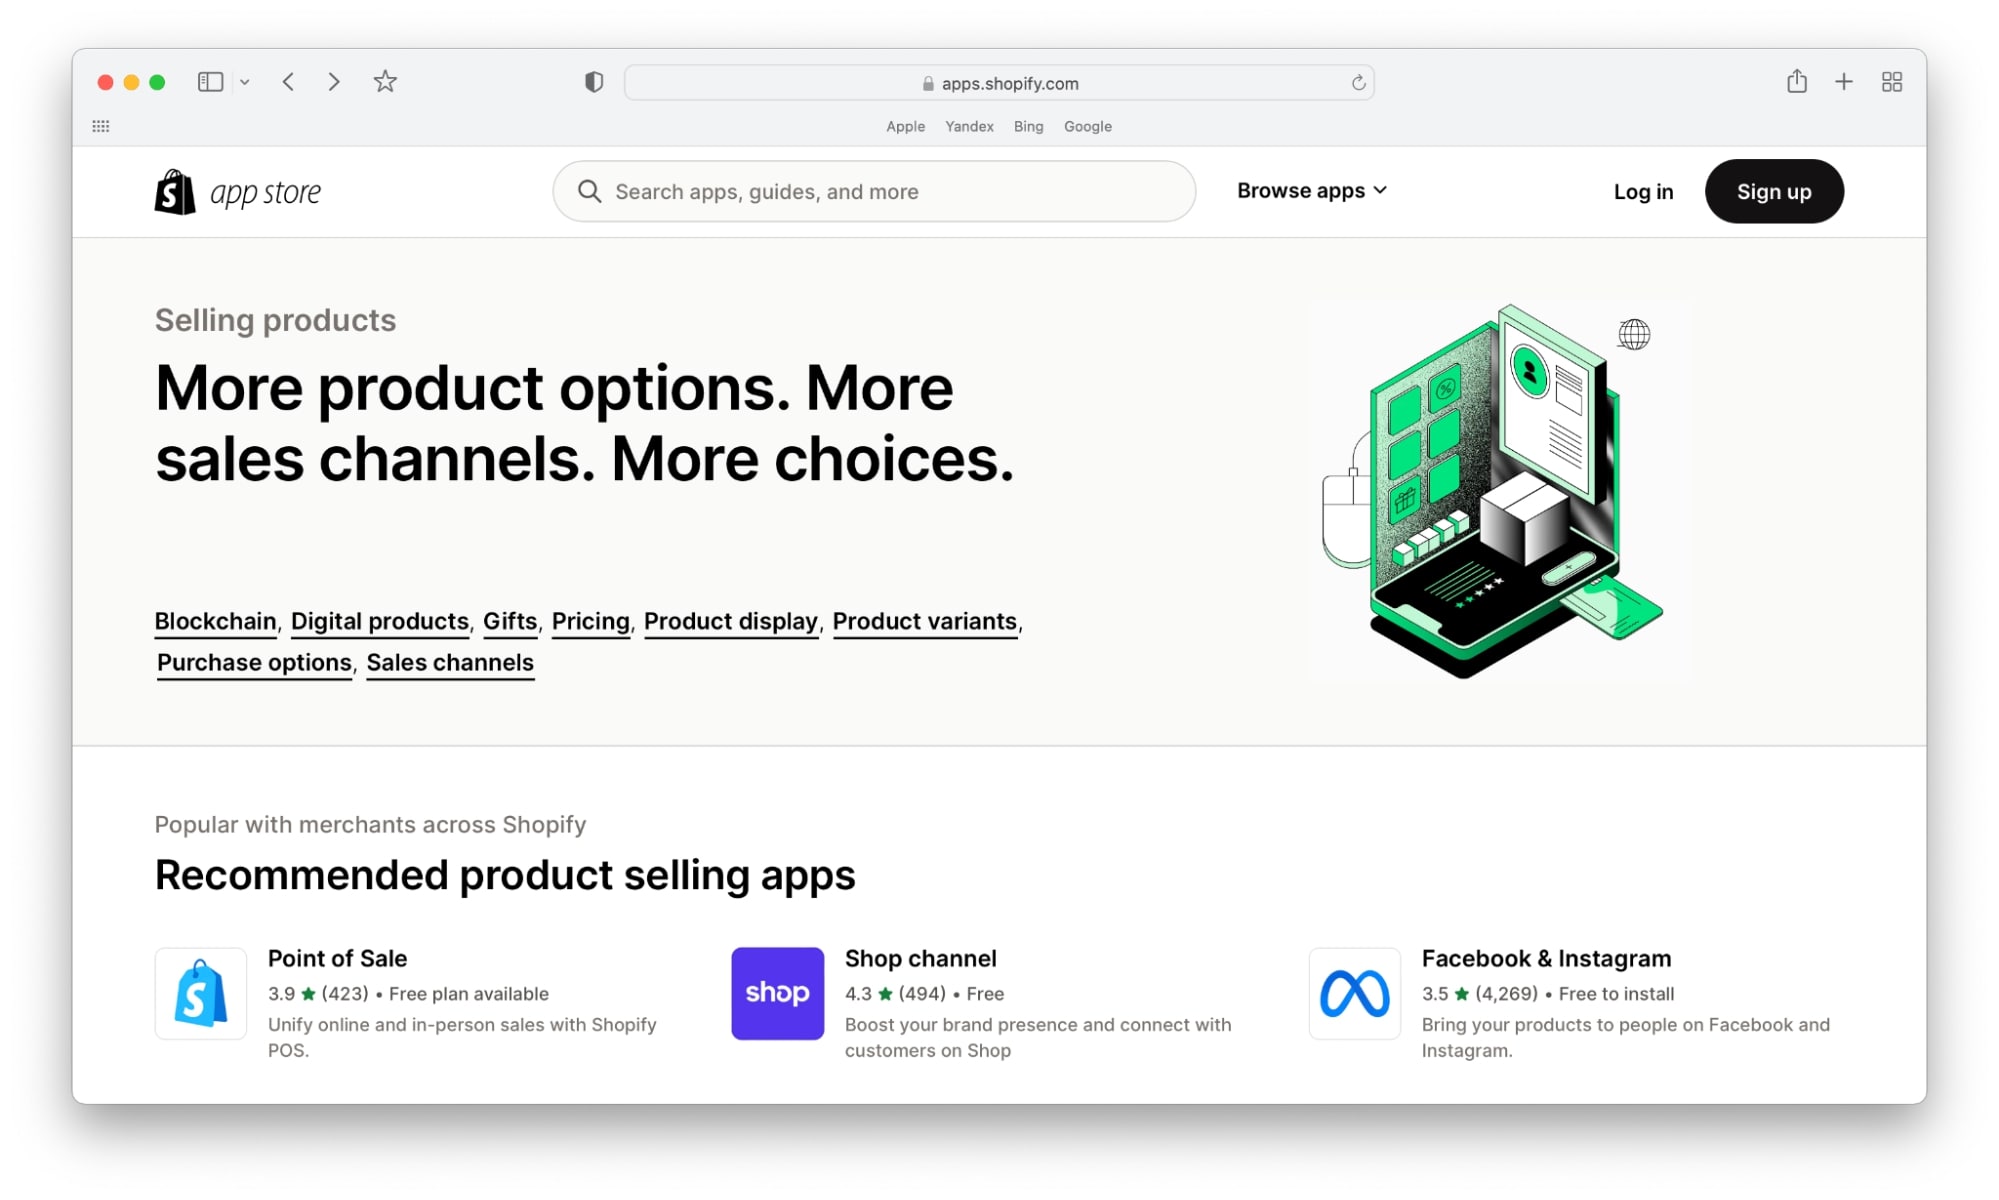 Shopify app store subcategories